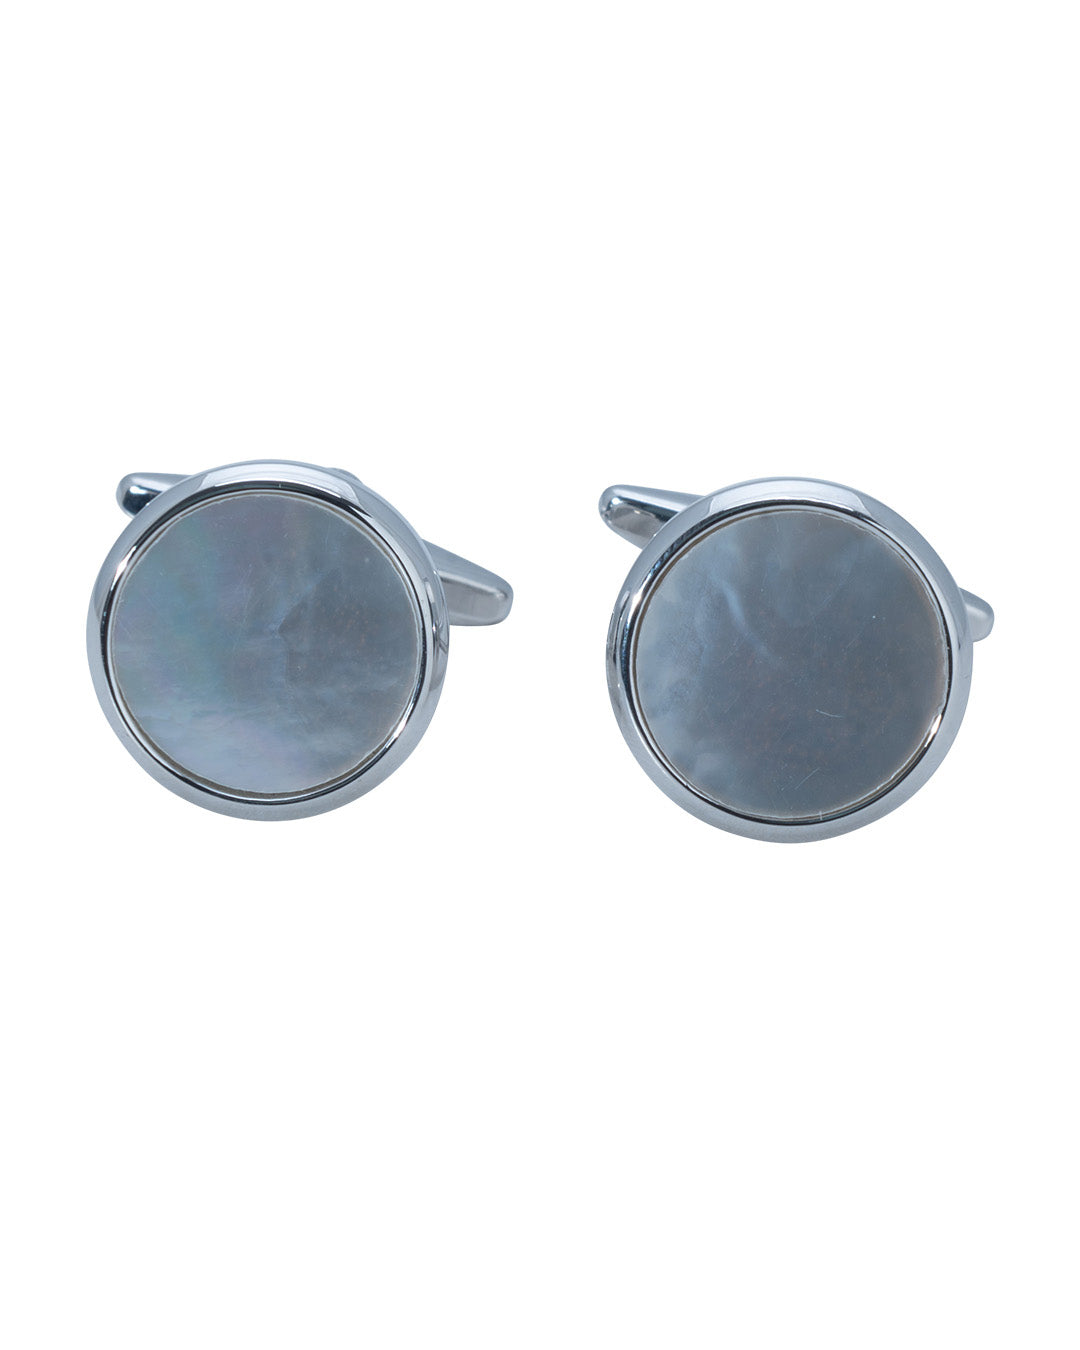 Round Silver Cufflinks With White Polished Flat Stone